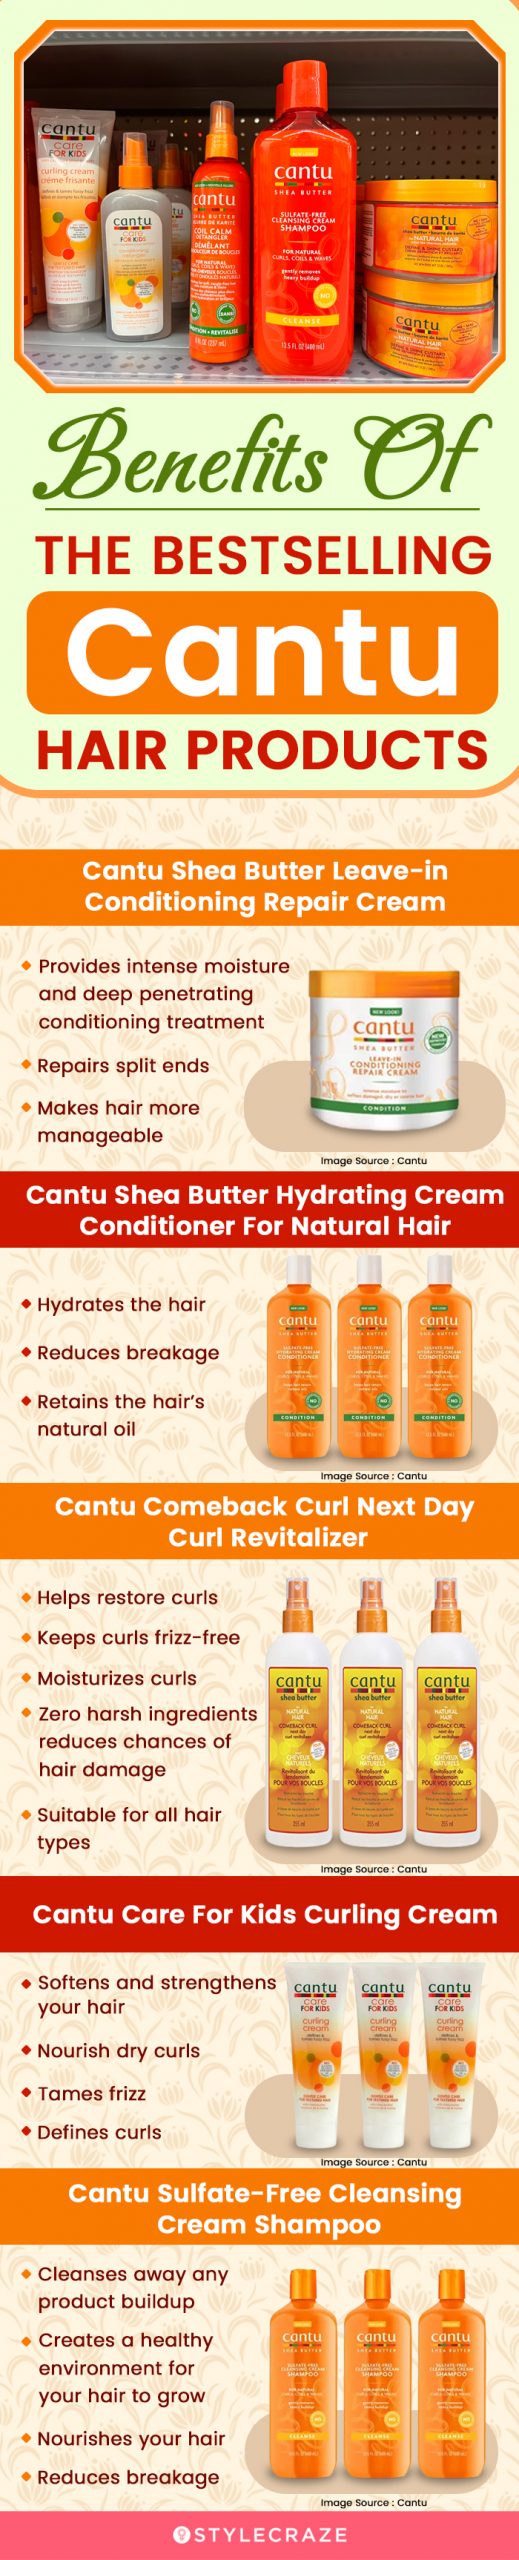 Benefits Of The Bestselling Cantu Hair Products (infographic)